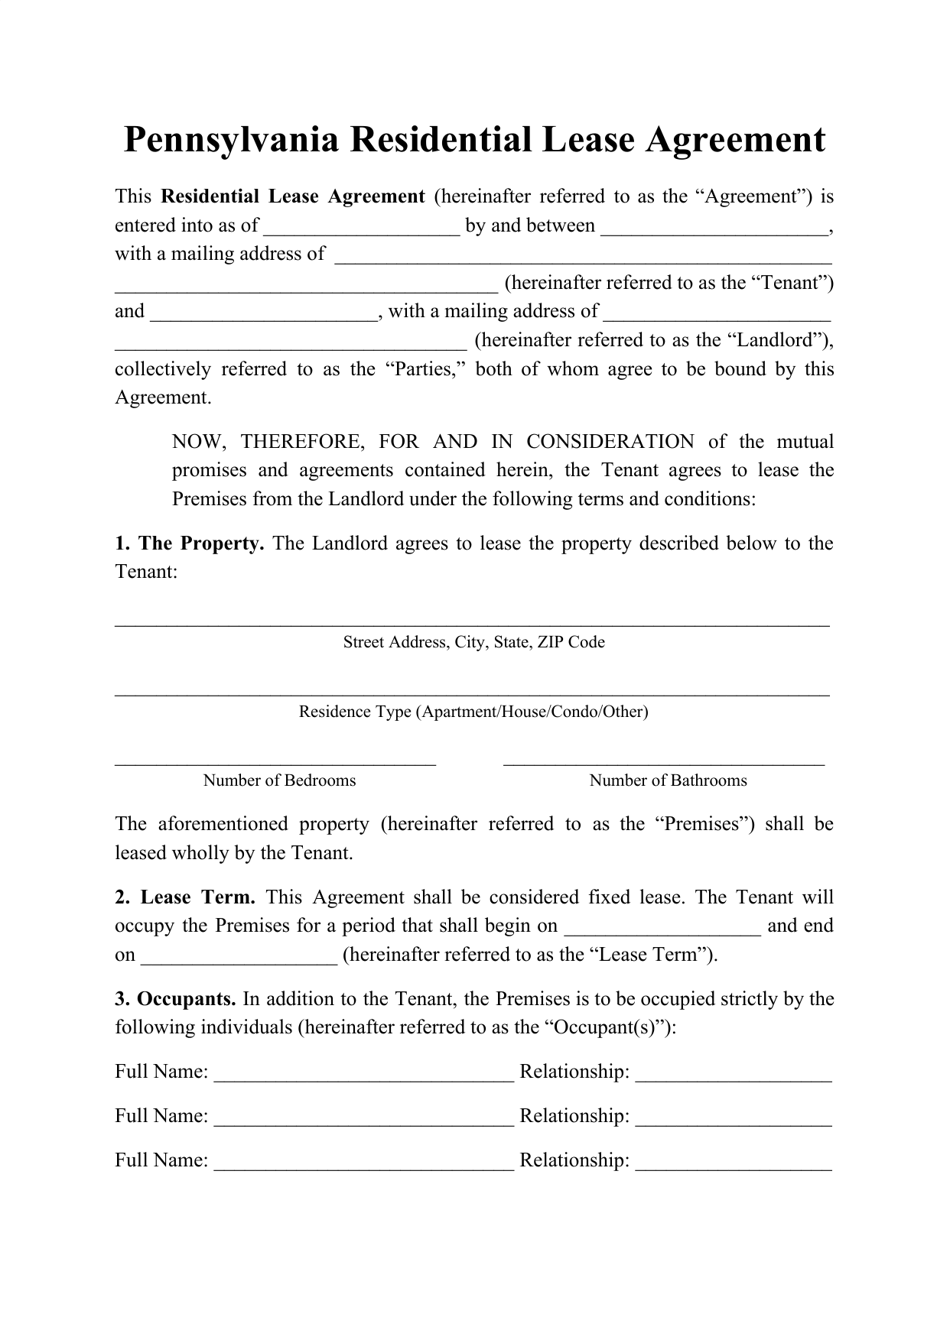 Pennsylvania Residential Lease Agreement Template Download Printable